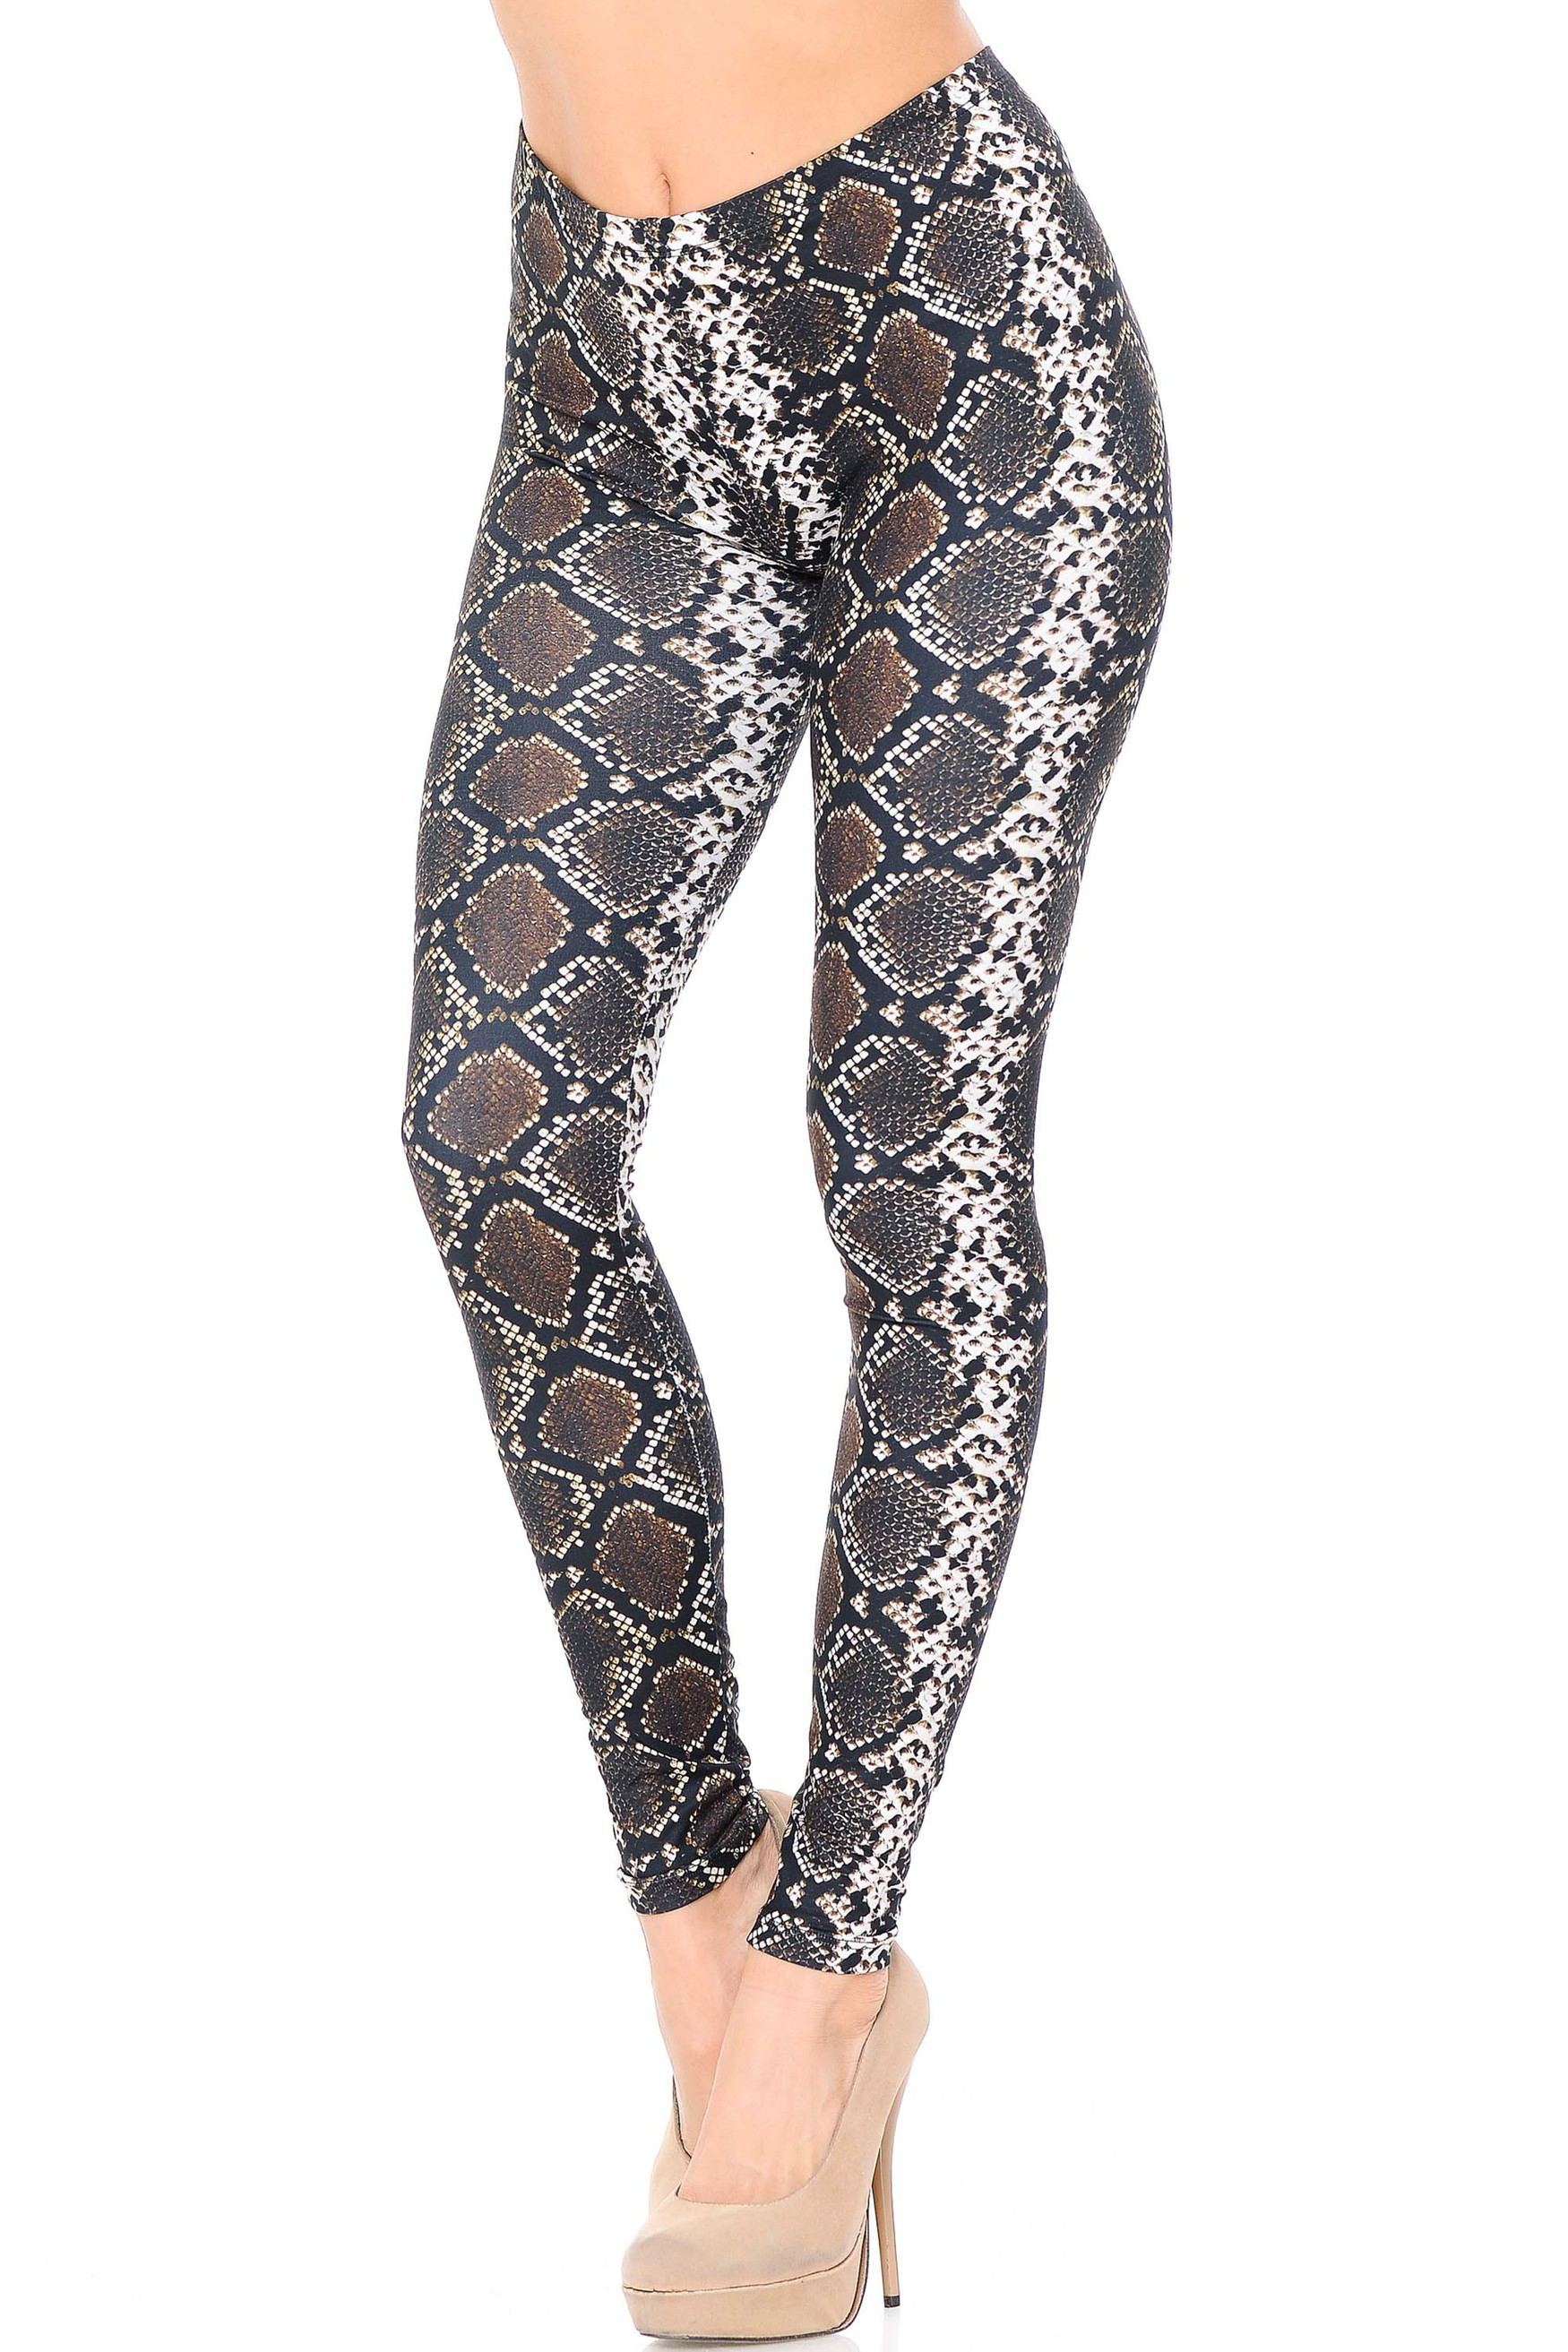 These Double Brushed Brown Boa Snakeskin Leggings feature an all over neutral toned reptile print design that gives you a sexy and edgy aesthetic.